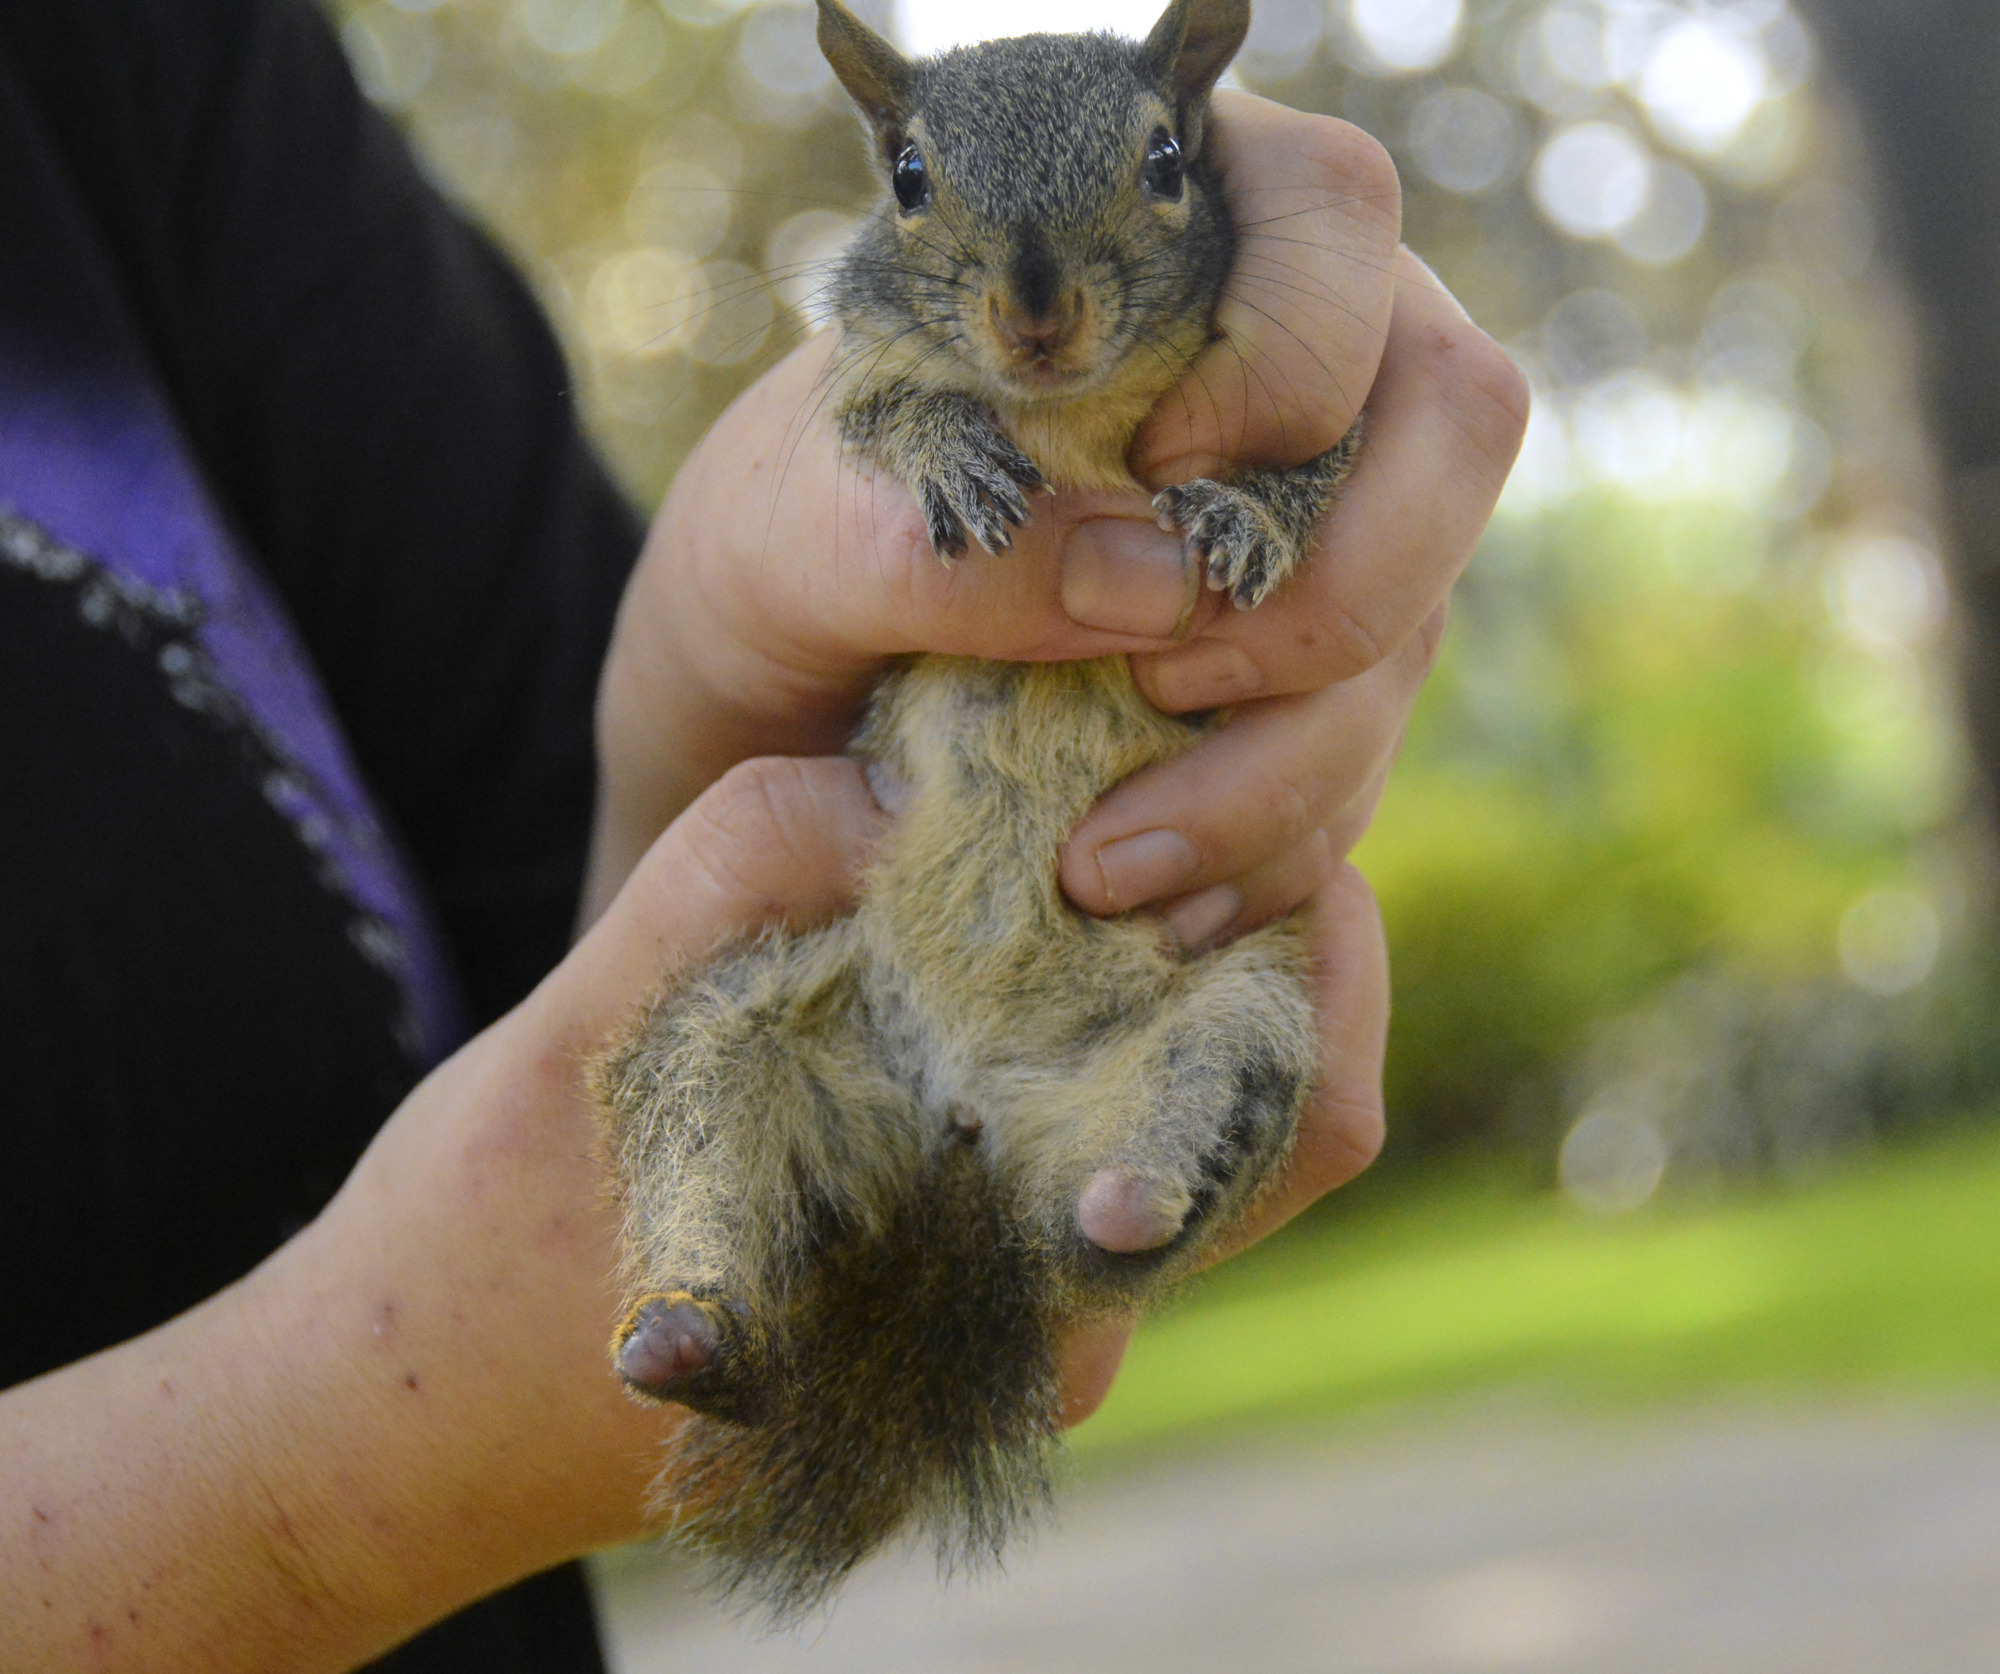 Lucky, a squirrel that lost its hind legs and tail in a tree-cutting accident, is one of Boskey’s permanent residents. 